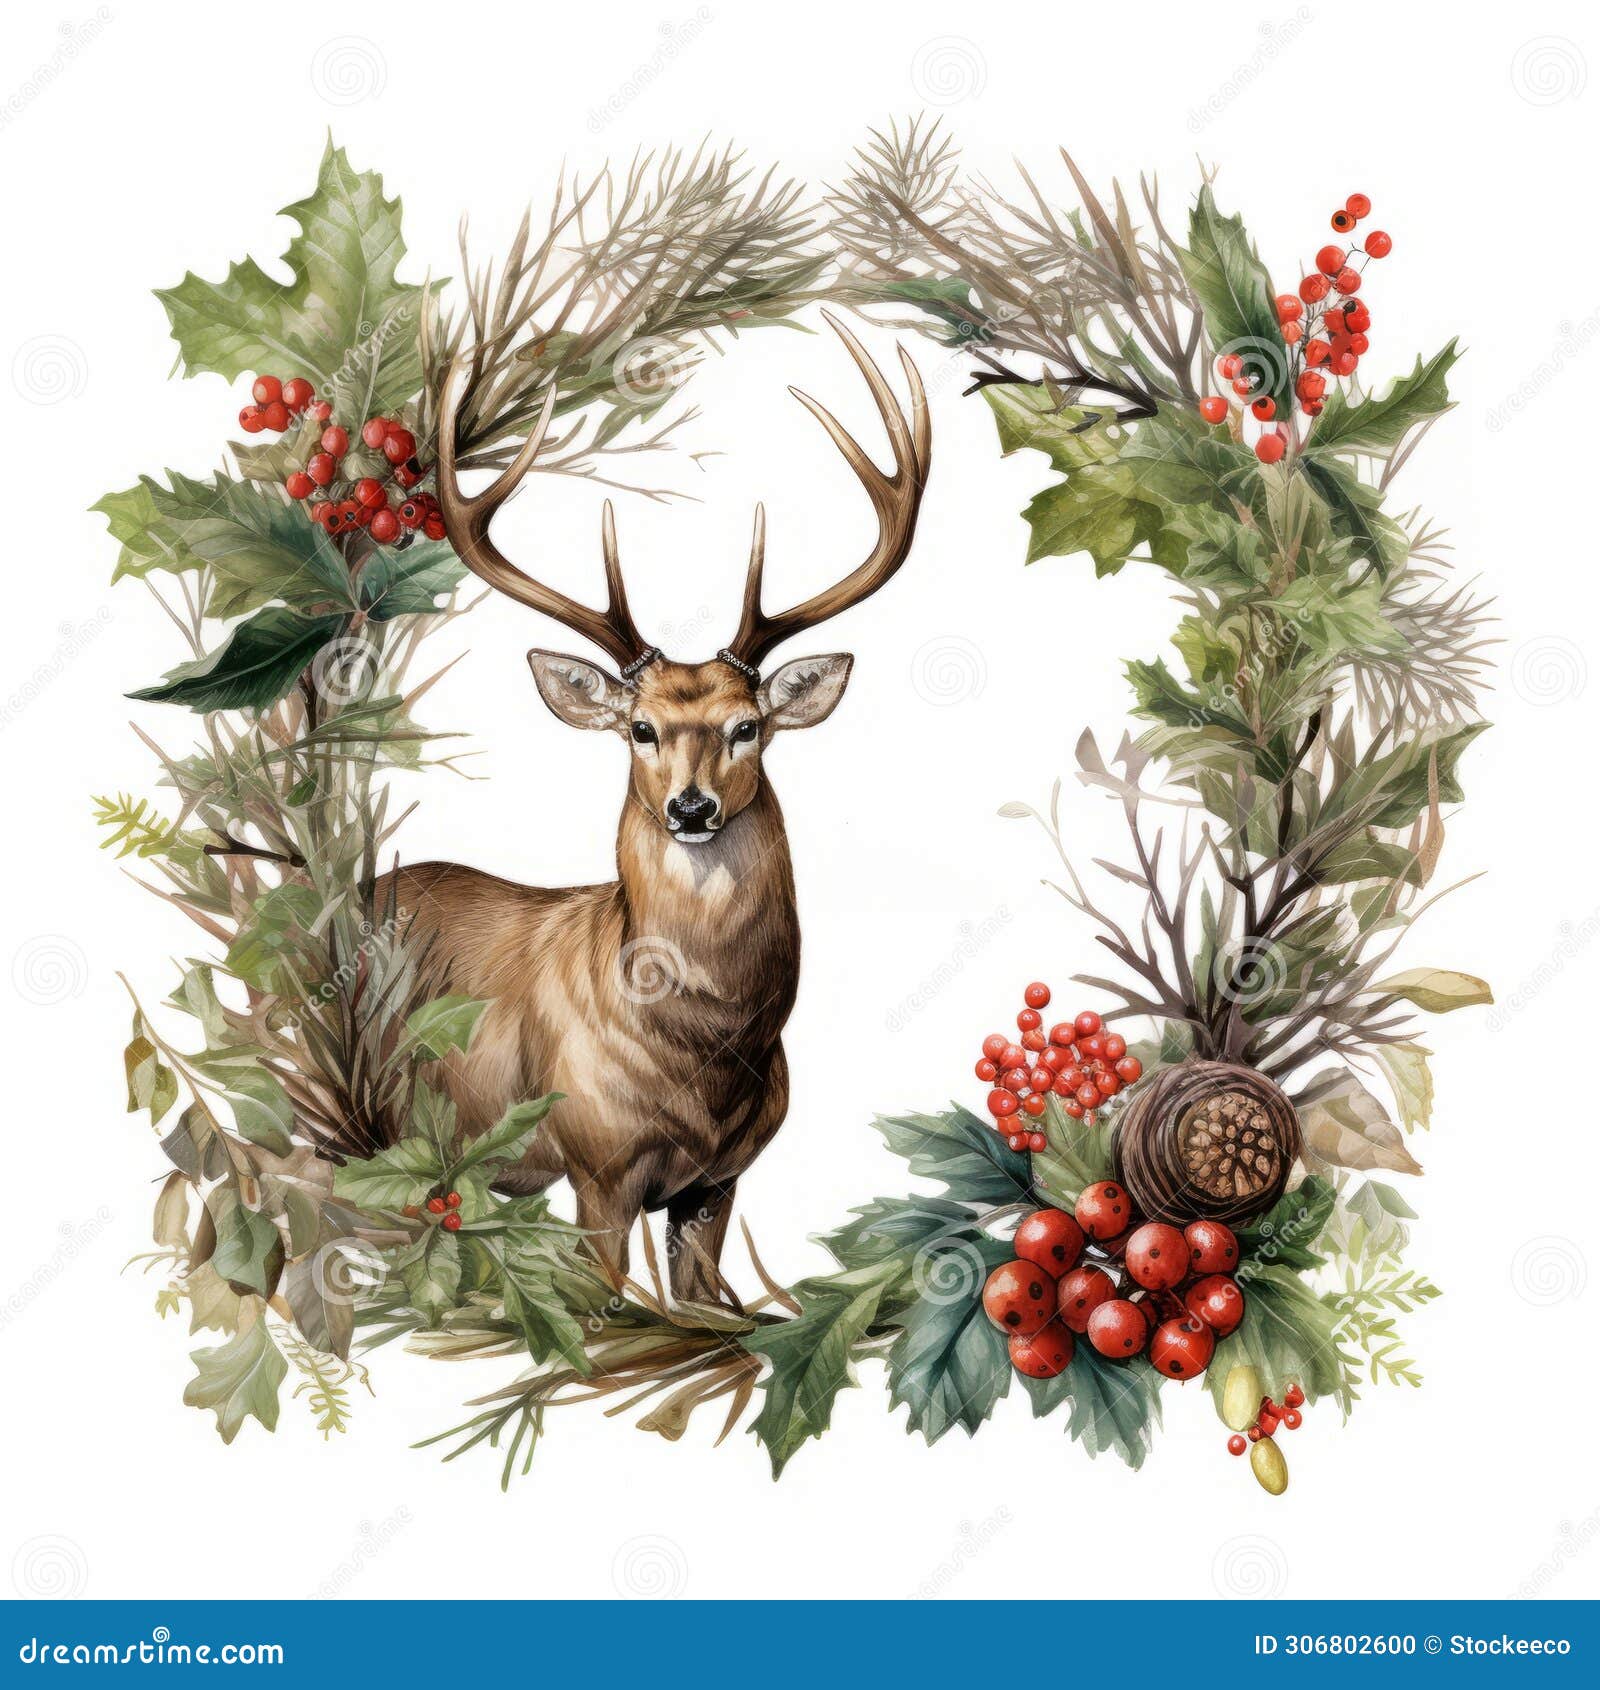 realistic watercolor wildlife clipart with forest wreath